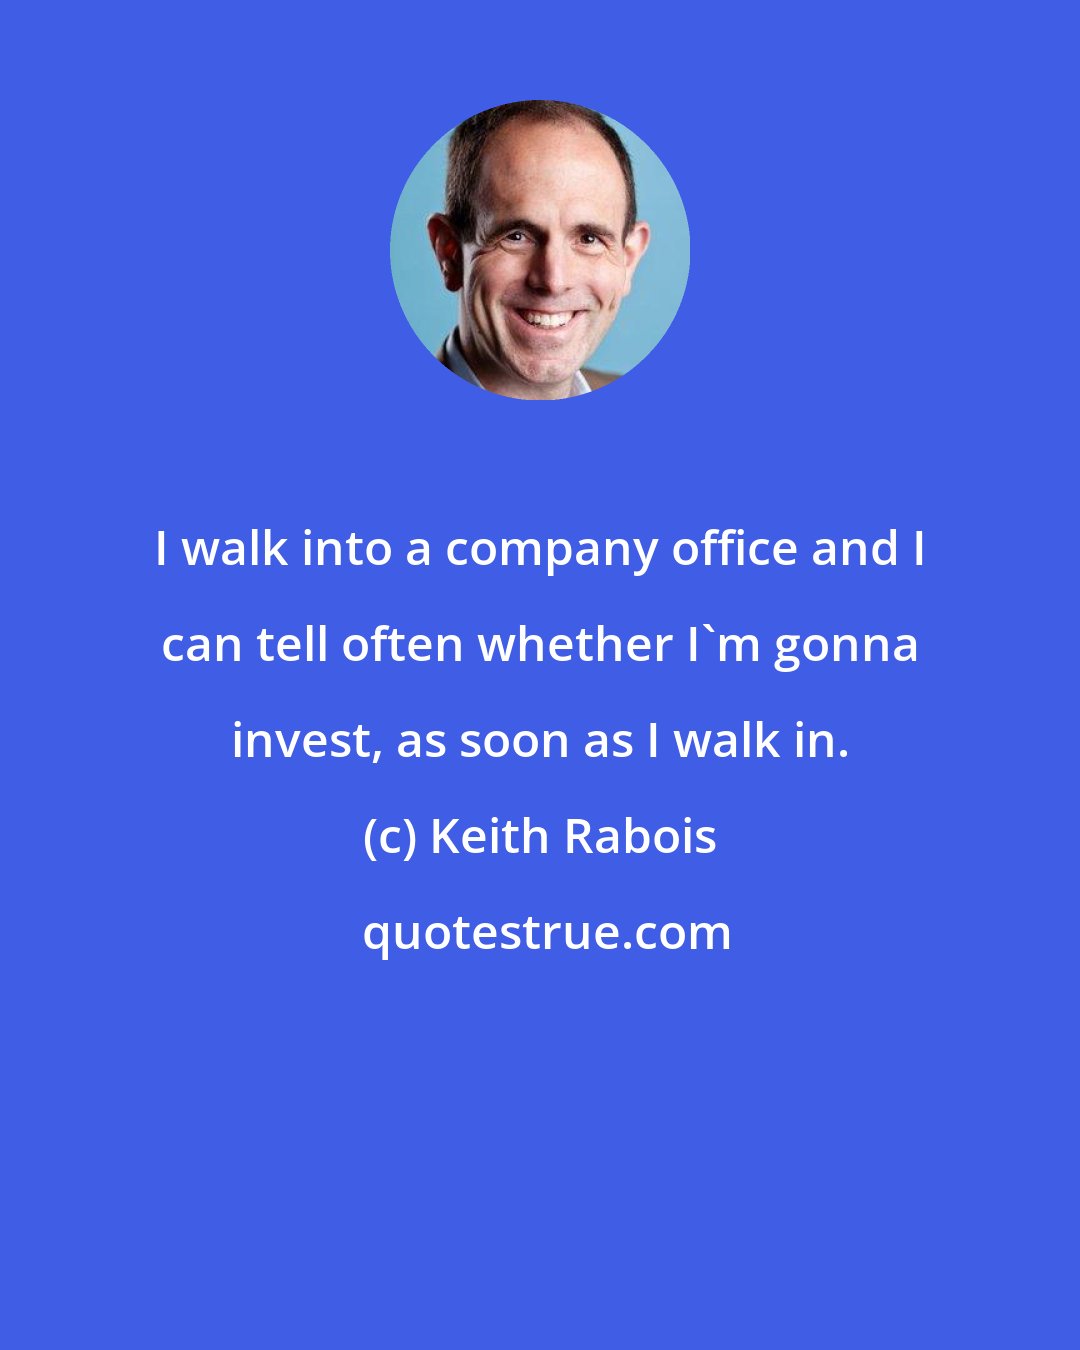 Keith Rabois: I walk into a company office and I can tell often whether I'm gonna invest, as soon as I walk in.